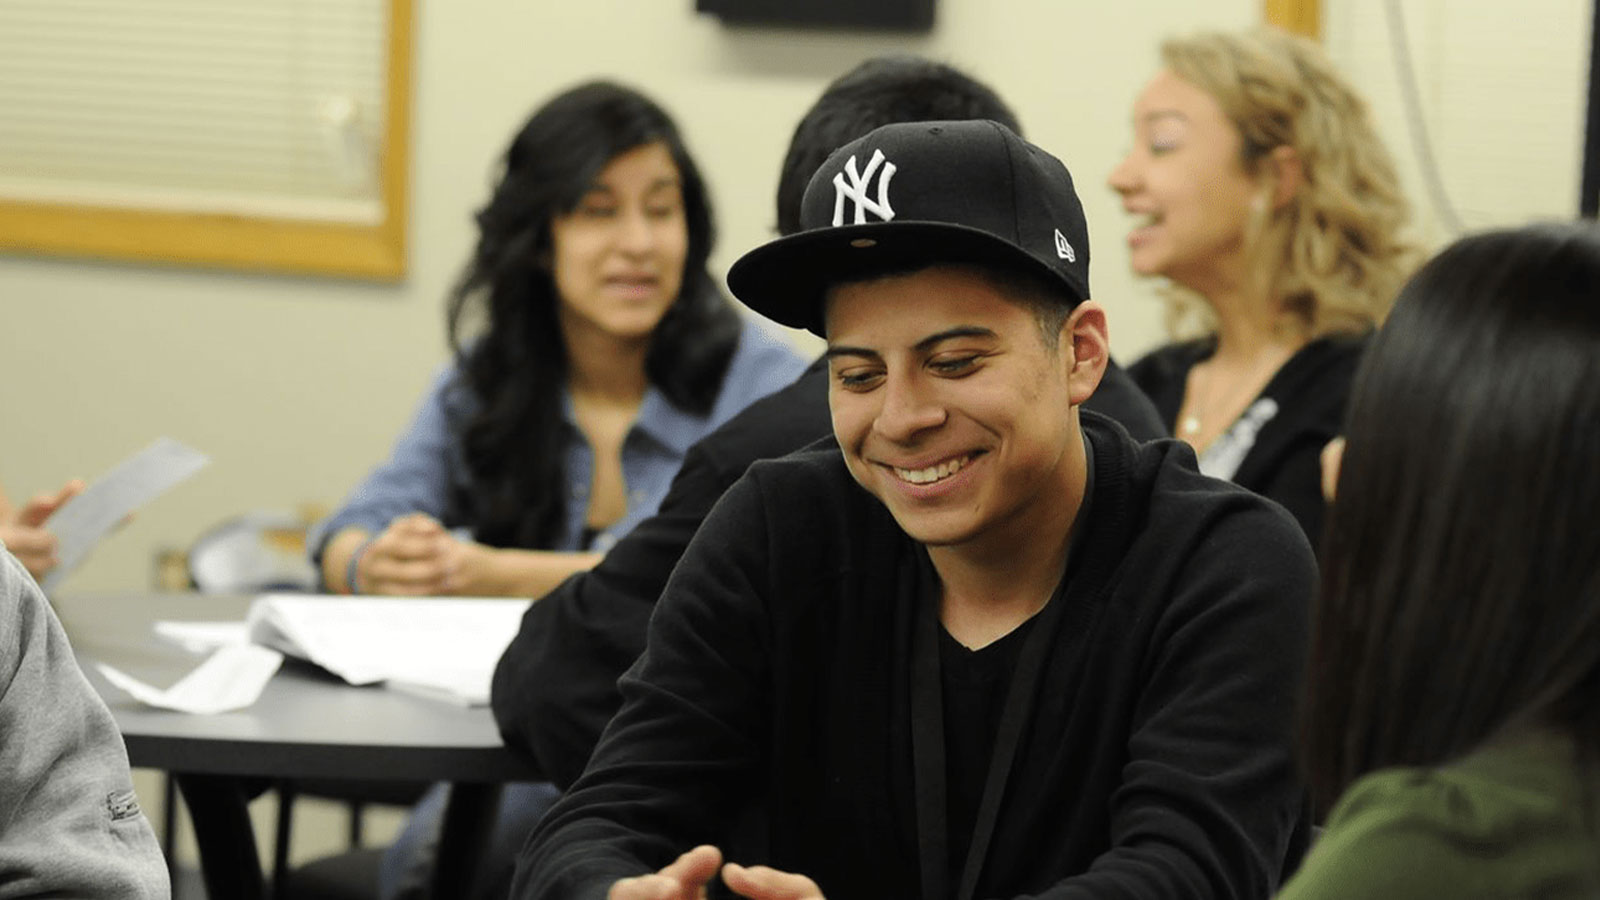 A student talking and smiling to a group